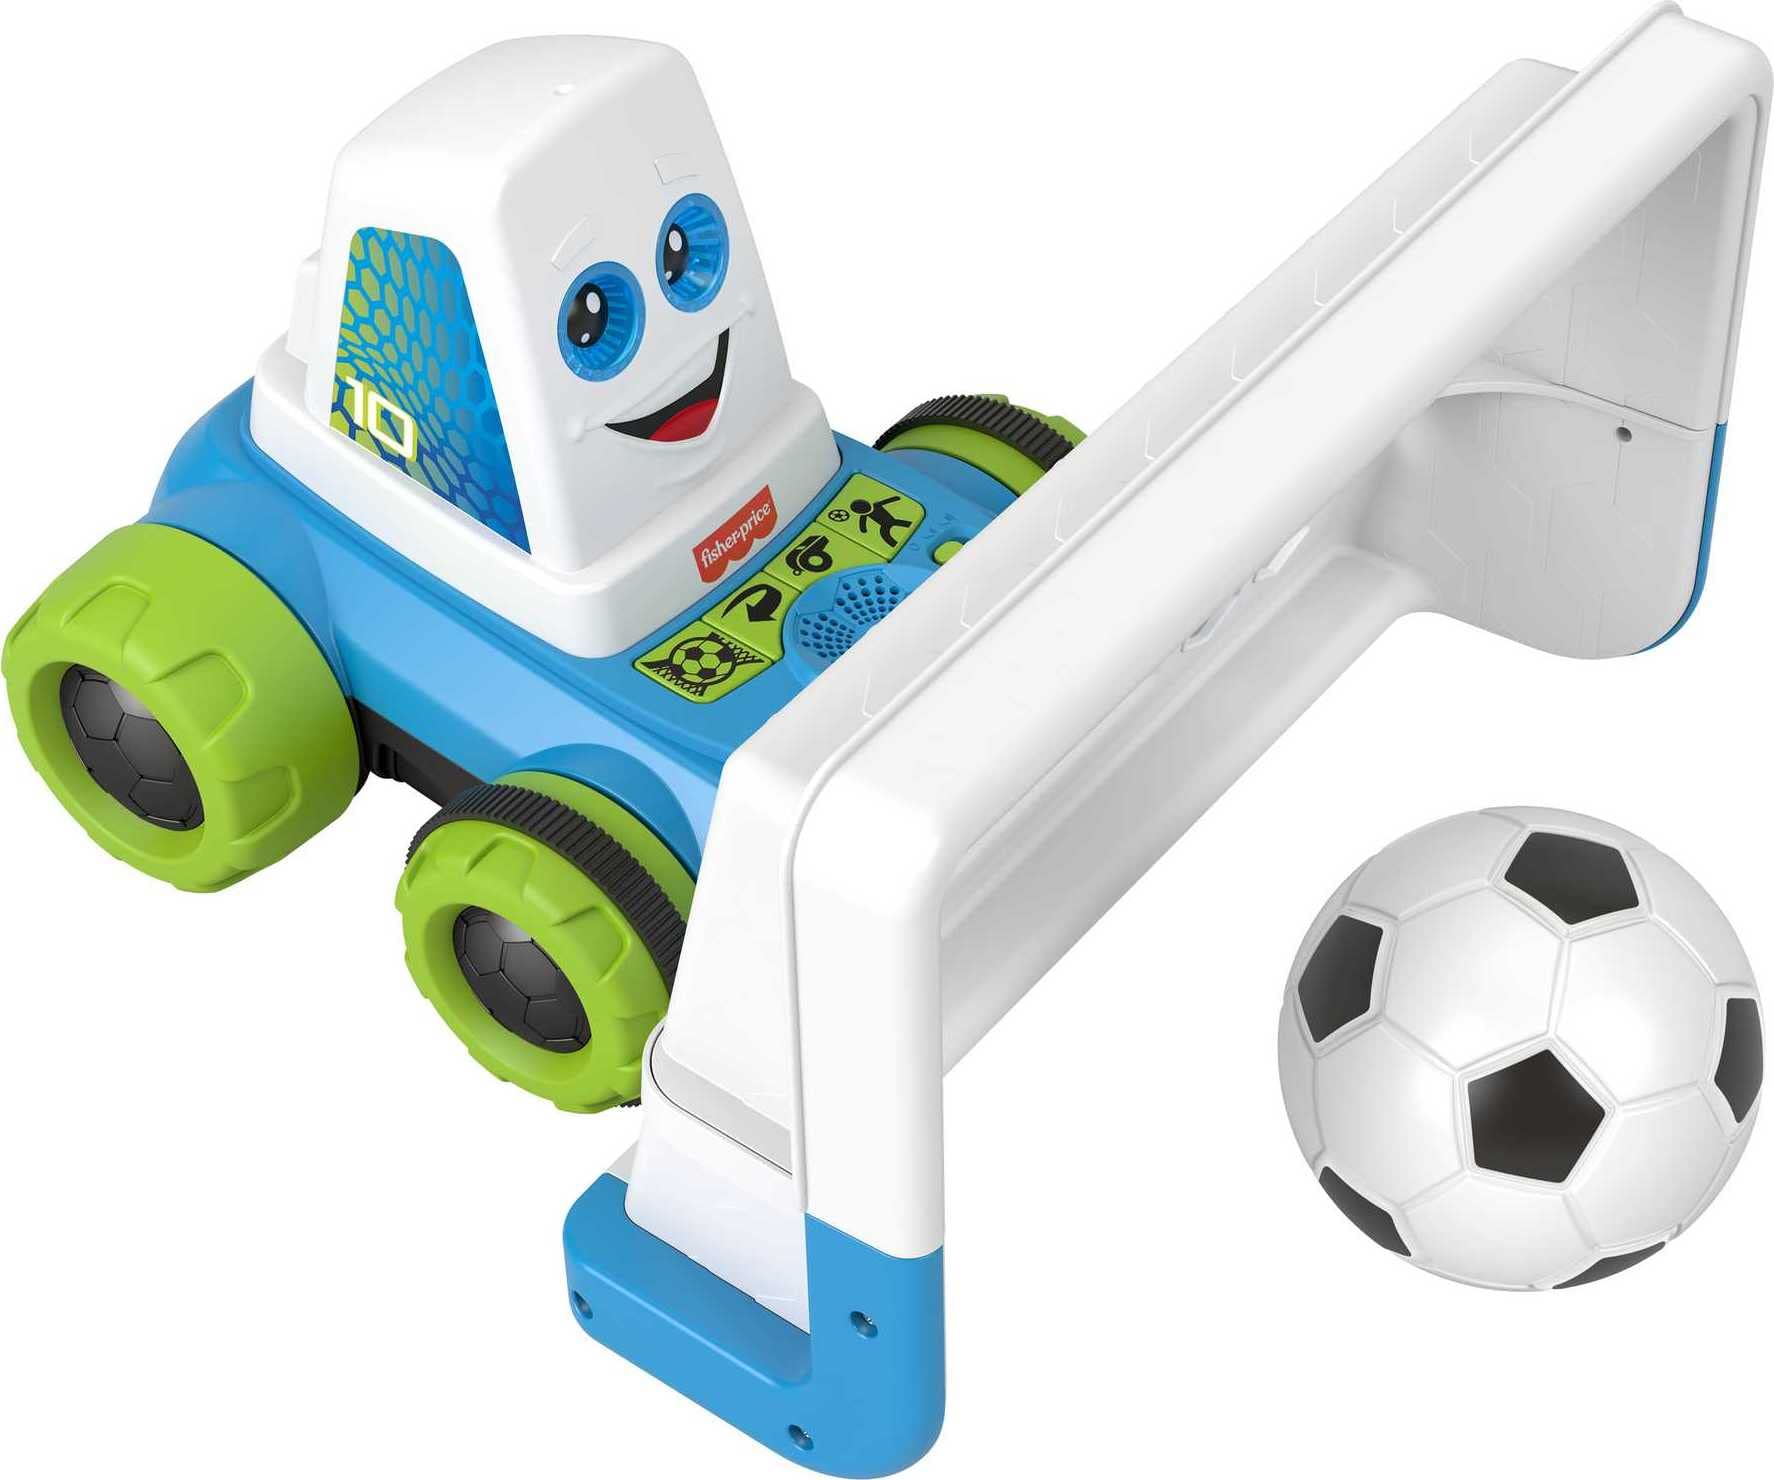 Fisher-Price Goaldozer Motorized Electronic Soccer Game Net w/ Lights & Sounds $25.40 + Free Shipping w/ Prime or on orders $35+